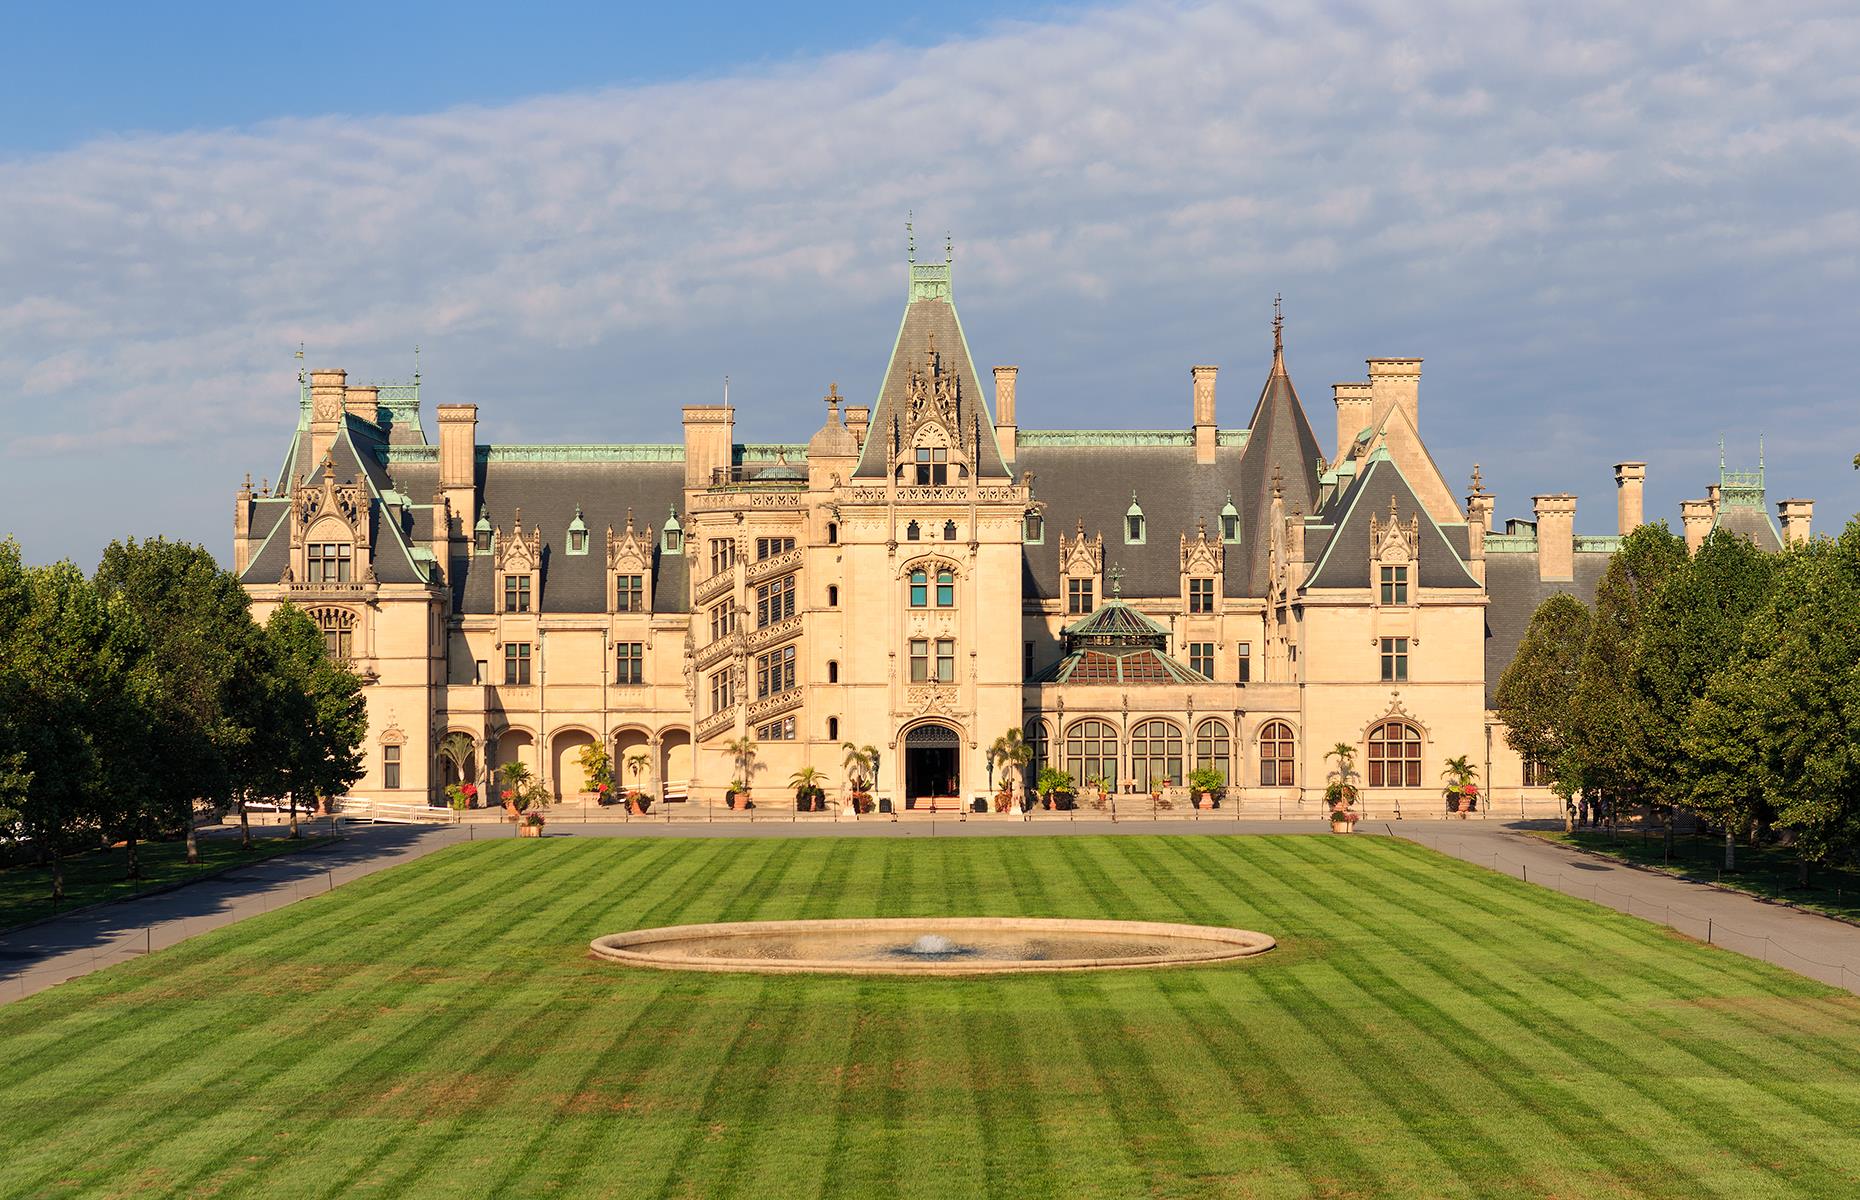 <p>One of the country's most spectacular pieces of architecture, this Gilded Age mansion was constructed in 1889 by George Vanderbilt, grandson of the business magnate Cornelius Vanderbilt. The largest residential home in the US, it spans nearly 180,000 square feet (16,722sqm) with more than 250 rooms. It took six years to finish. Visitors can tour the property and even spend the night in one of the historic cottages.</p>  <p><a href="https://www.loveexploring.com/galleries/94798/spectacular-american-castles-you-never-knew-existed"><strong>Spectacular American castles you never knew existed</strong></a></p>